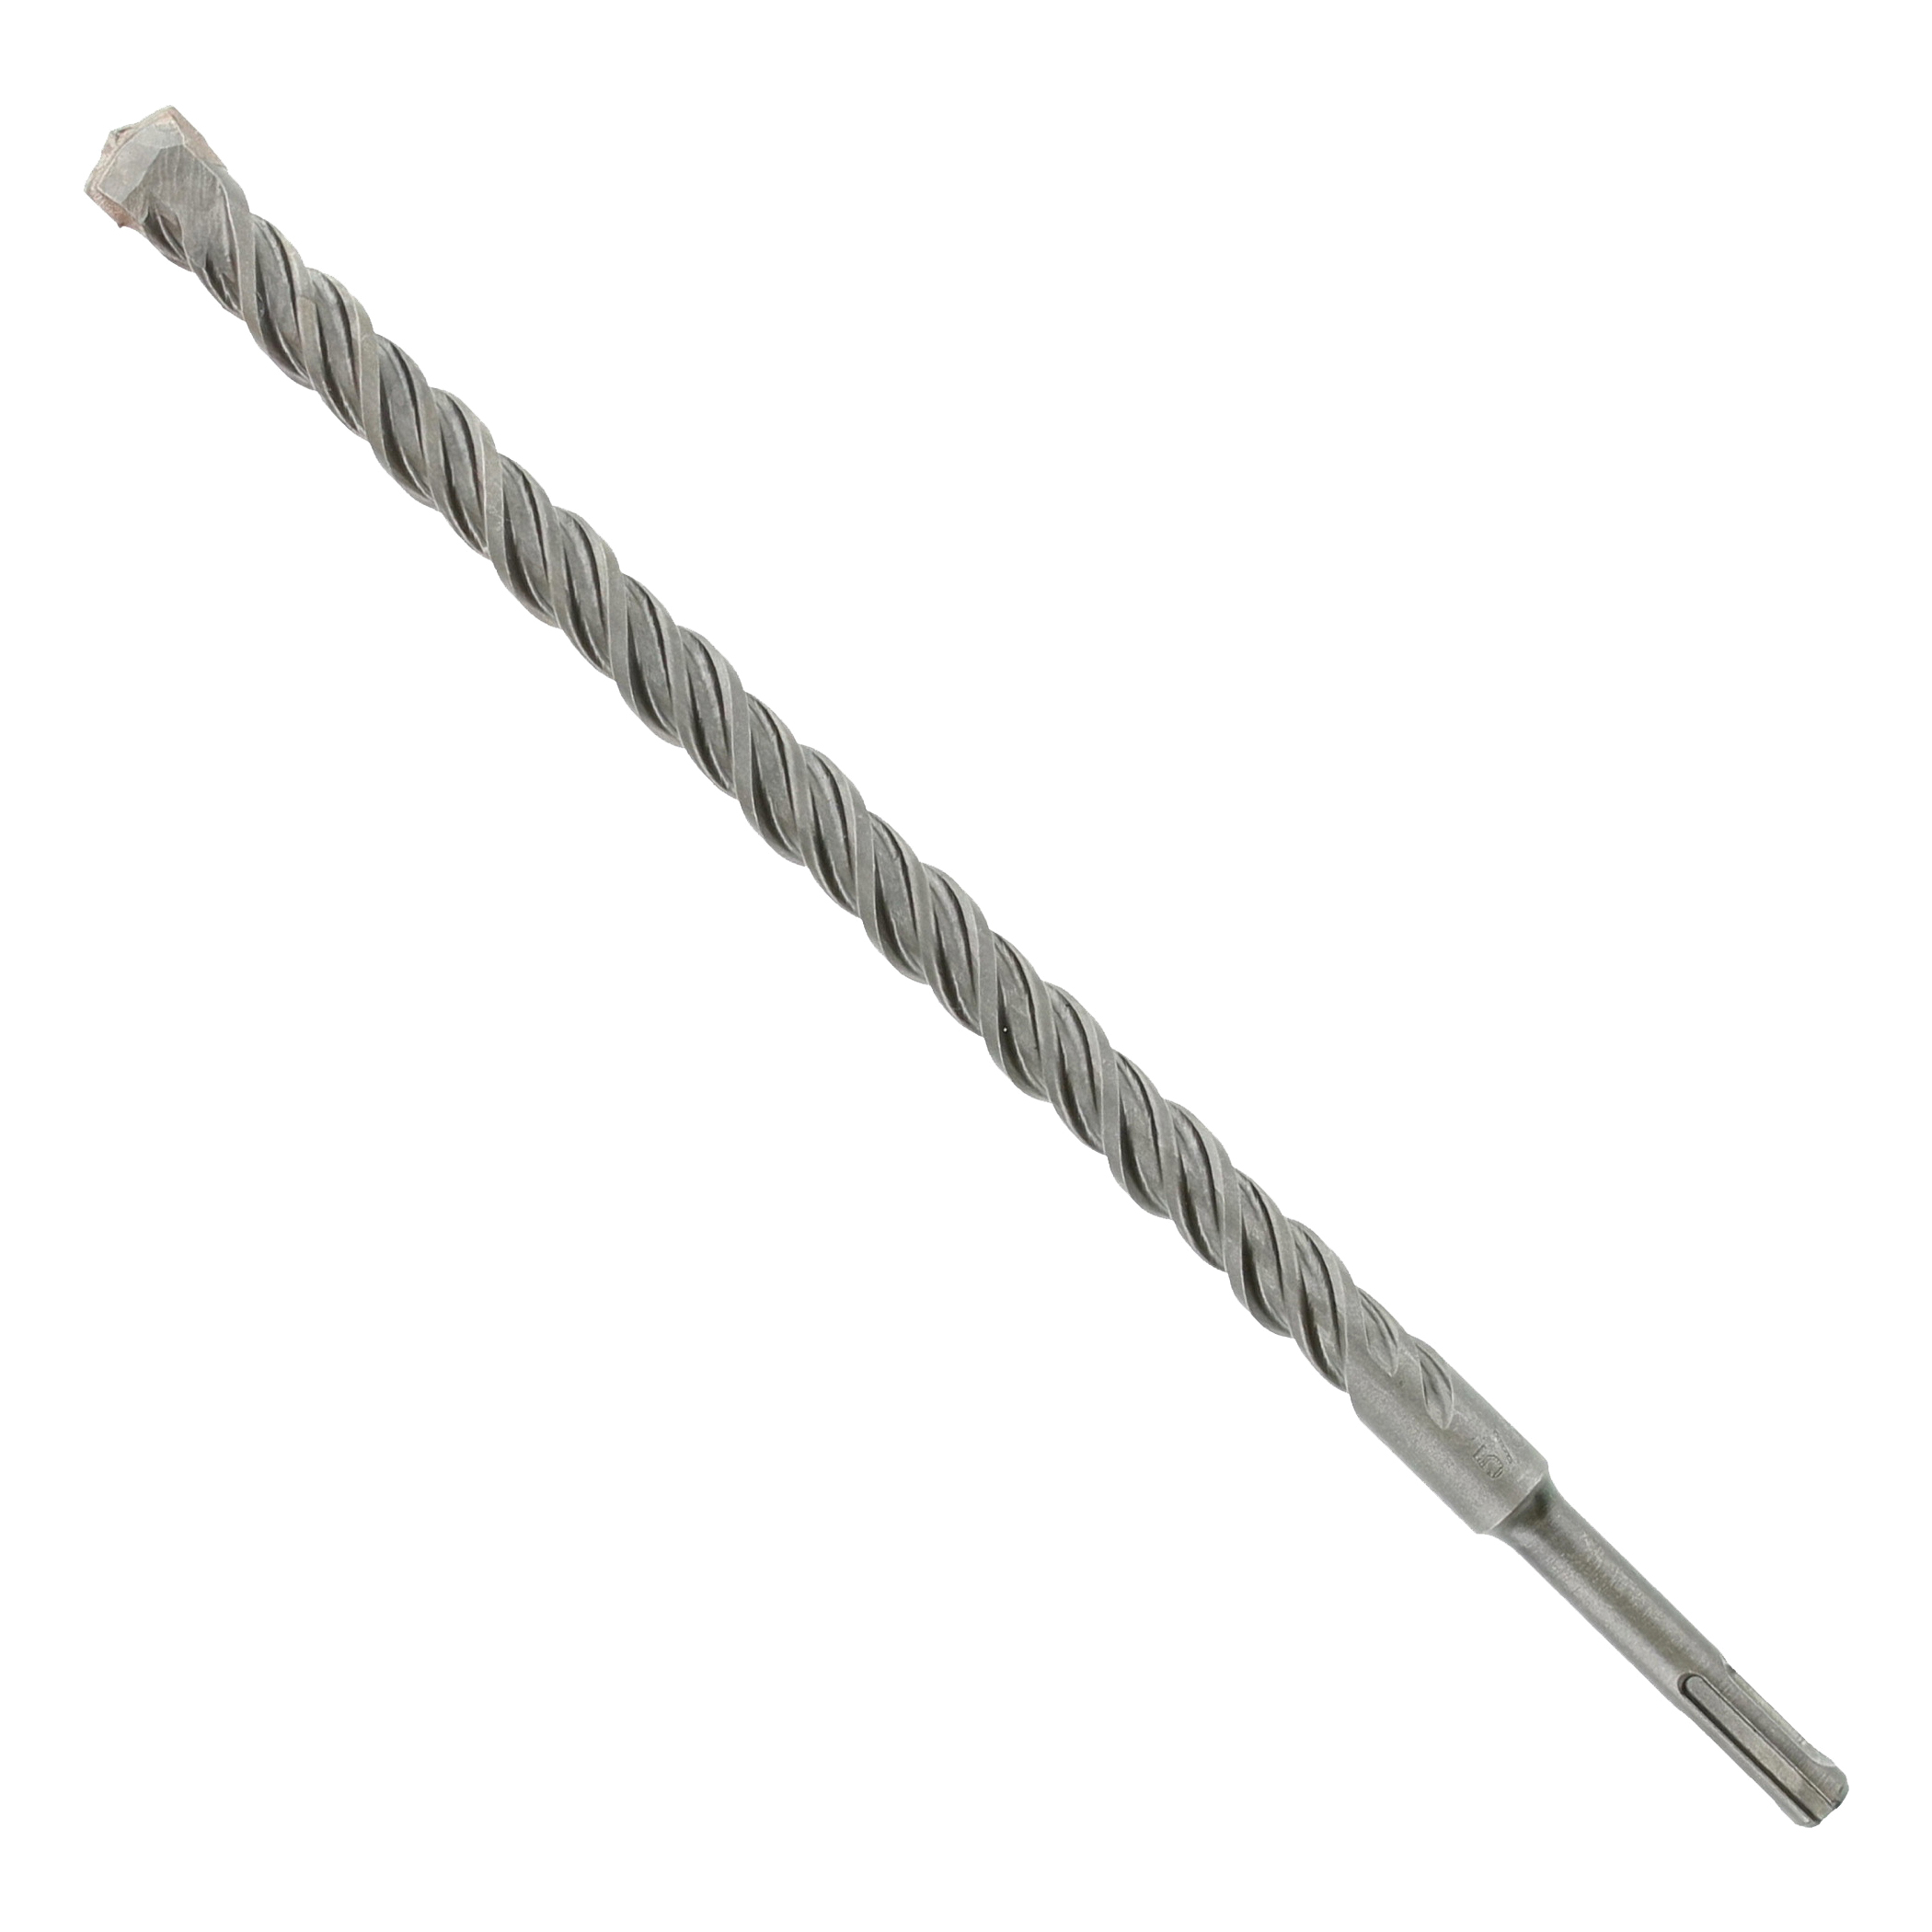 DMAPL2410 Hammer Drill Bit, 5/8 in Dia, 12 in OAL, Percussion, 4-Flute, SDS Plus Shank